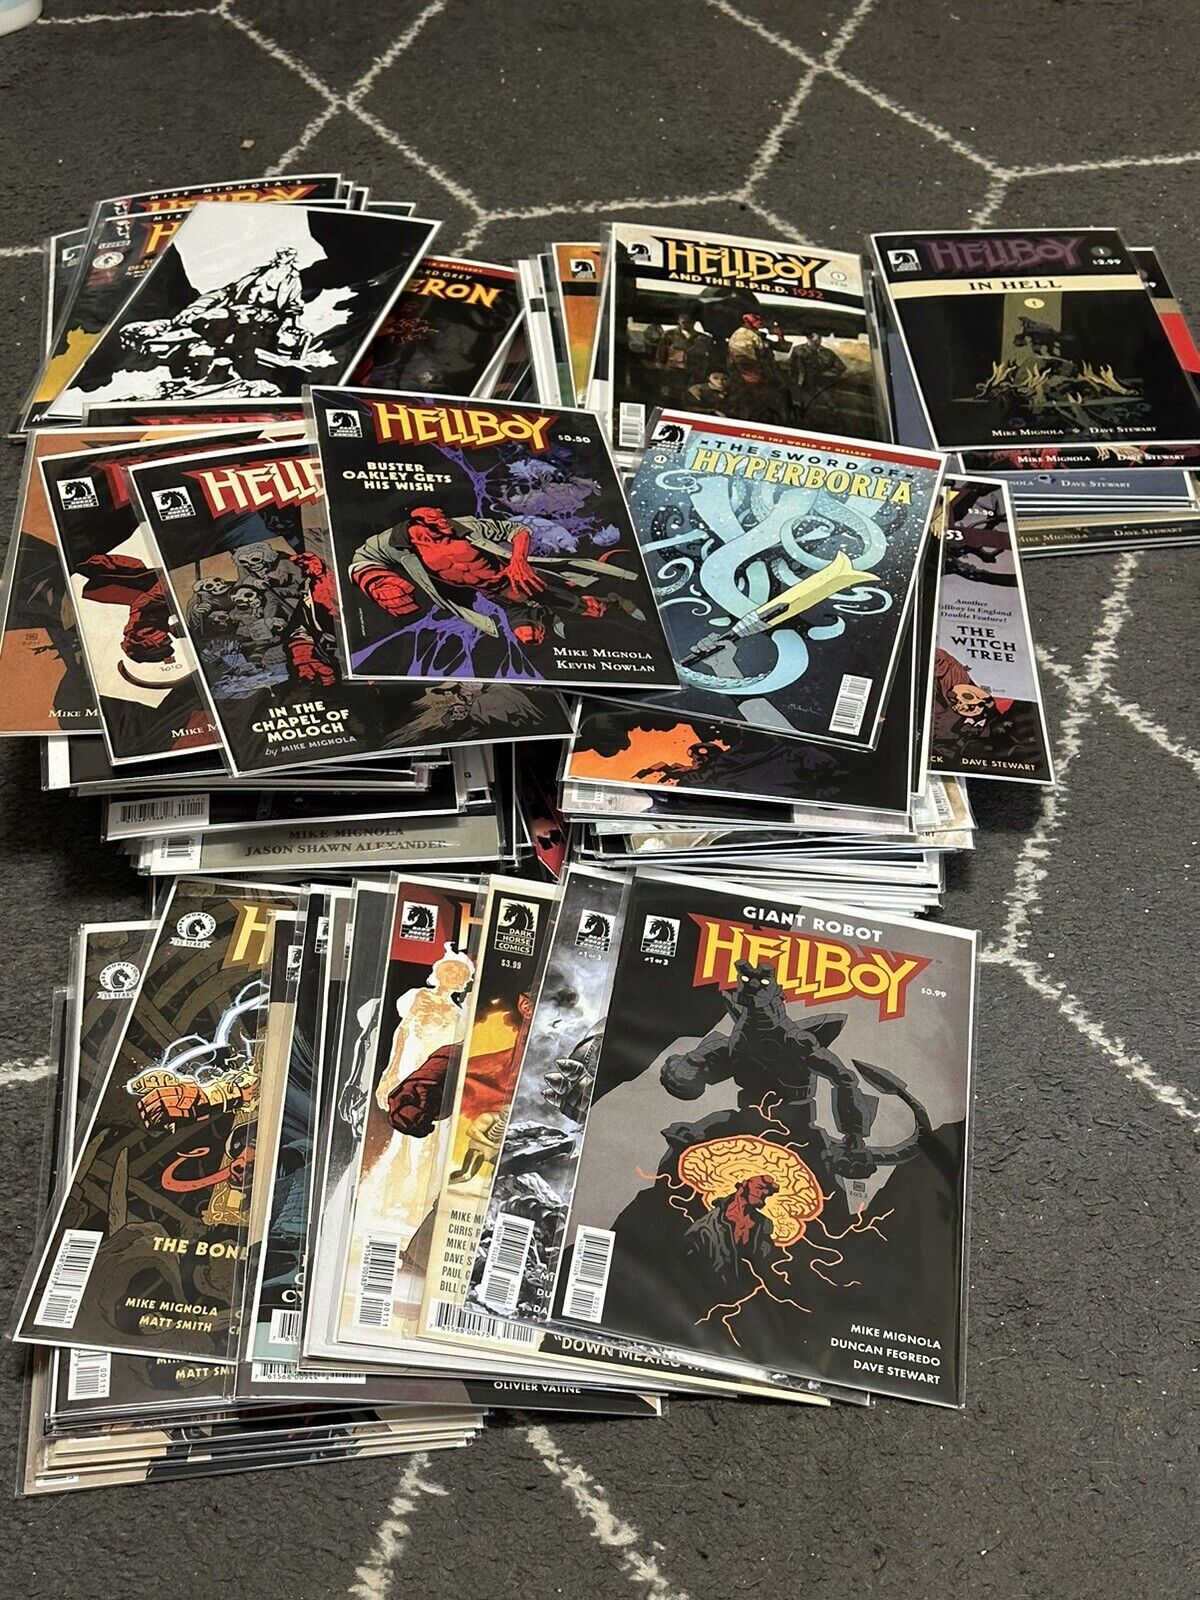 Mike Mignola's Hellboy BPRD Single Issue Comic Book Collection See 125 Issues